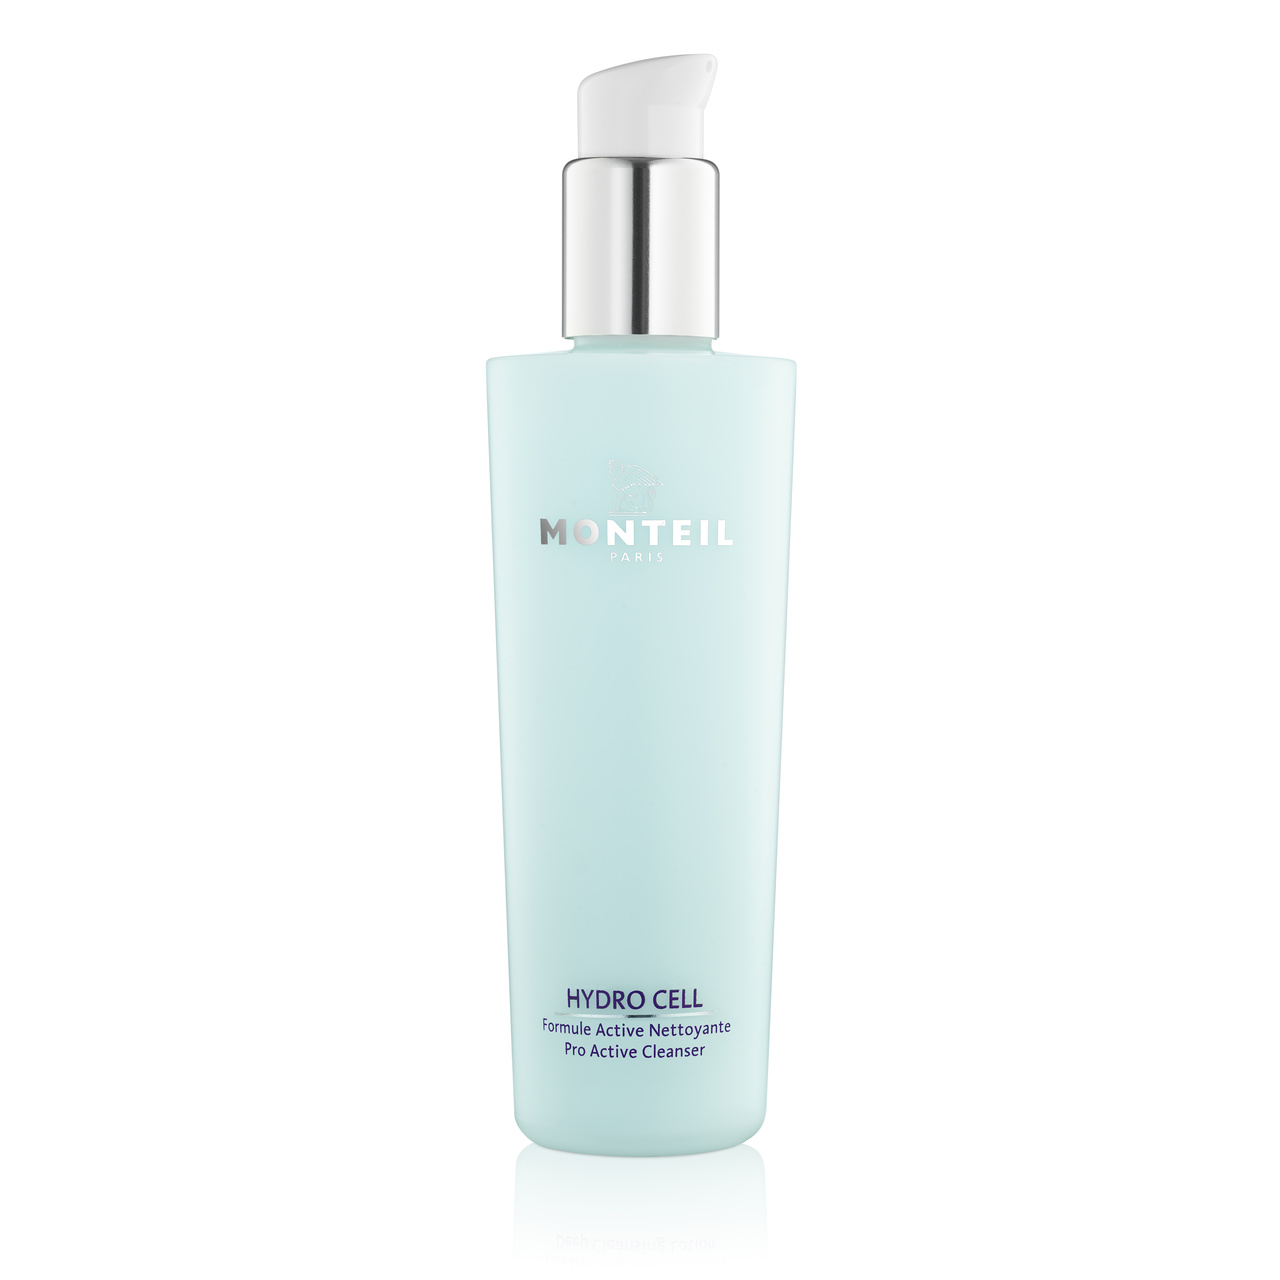 CLEANSING Pro Active Cleanser